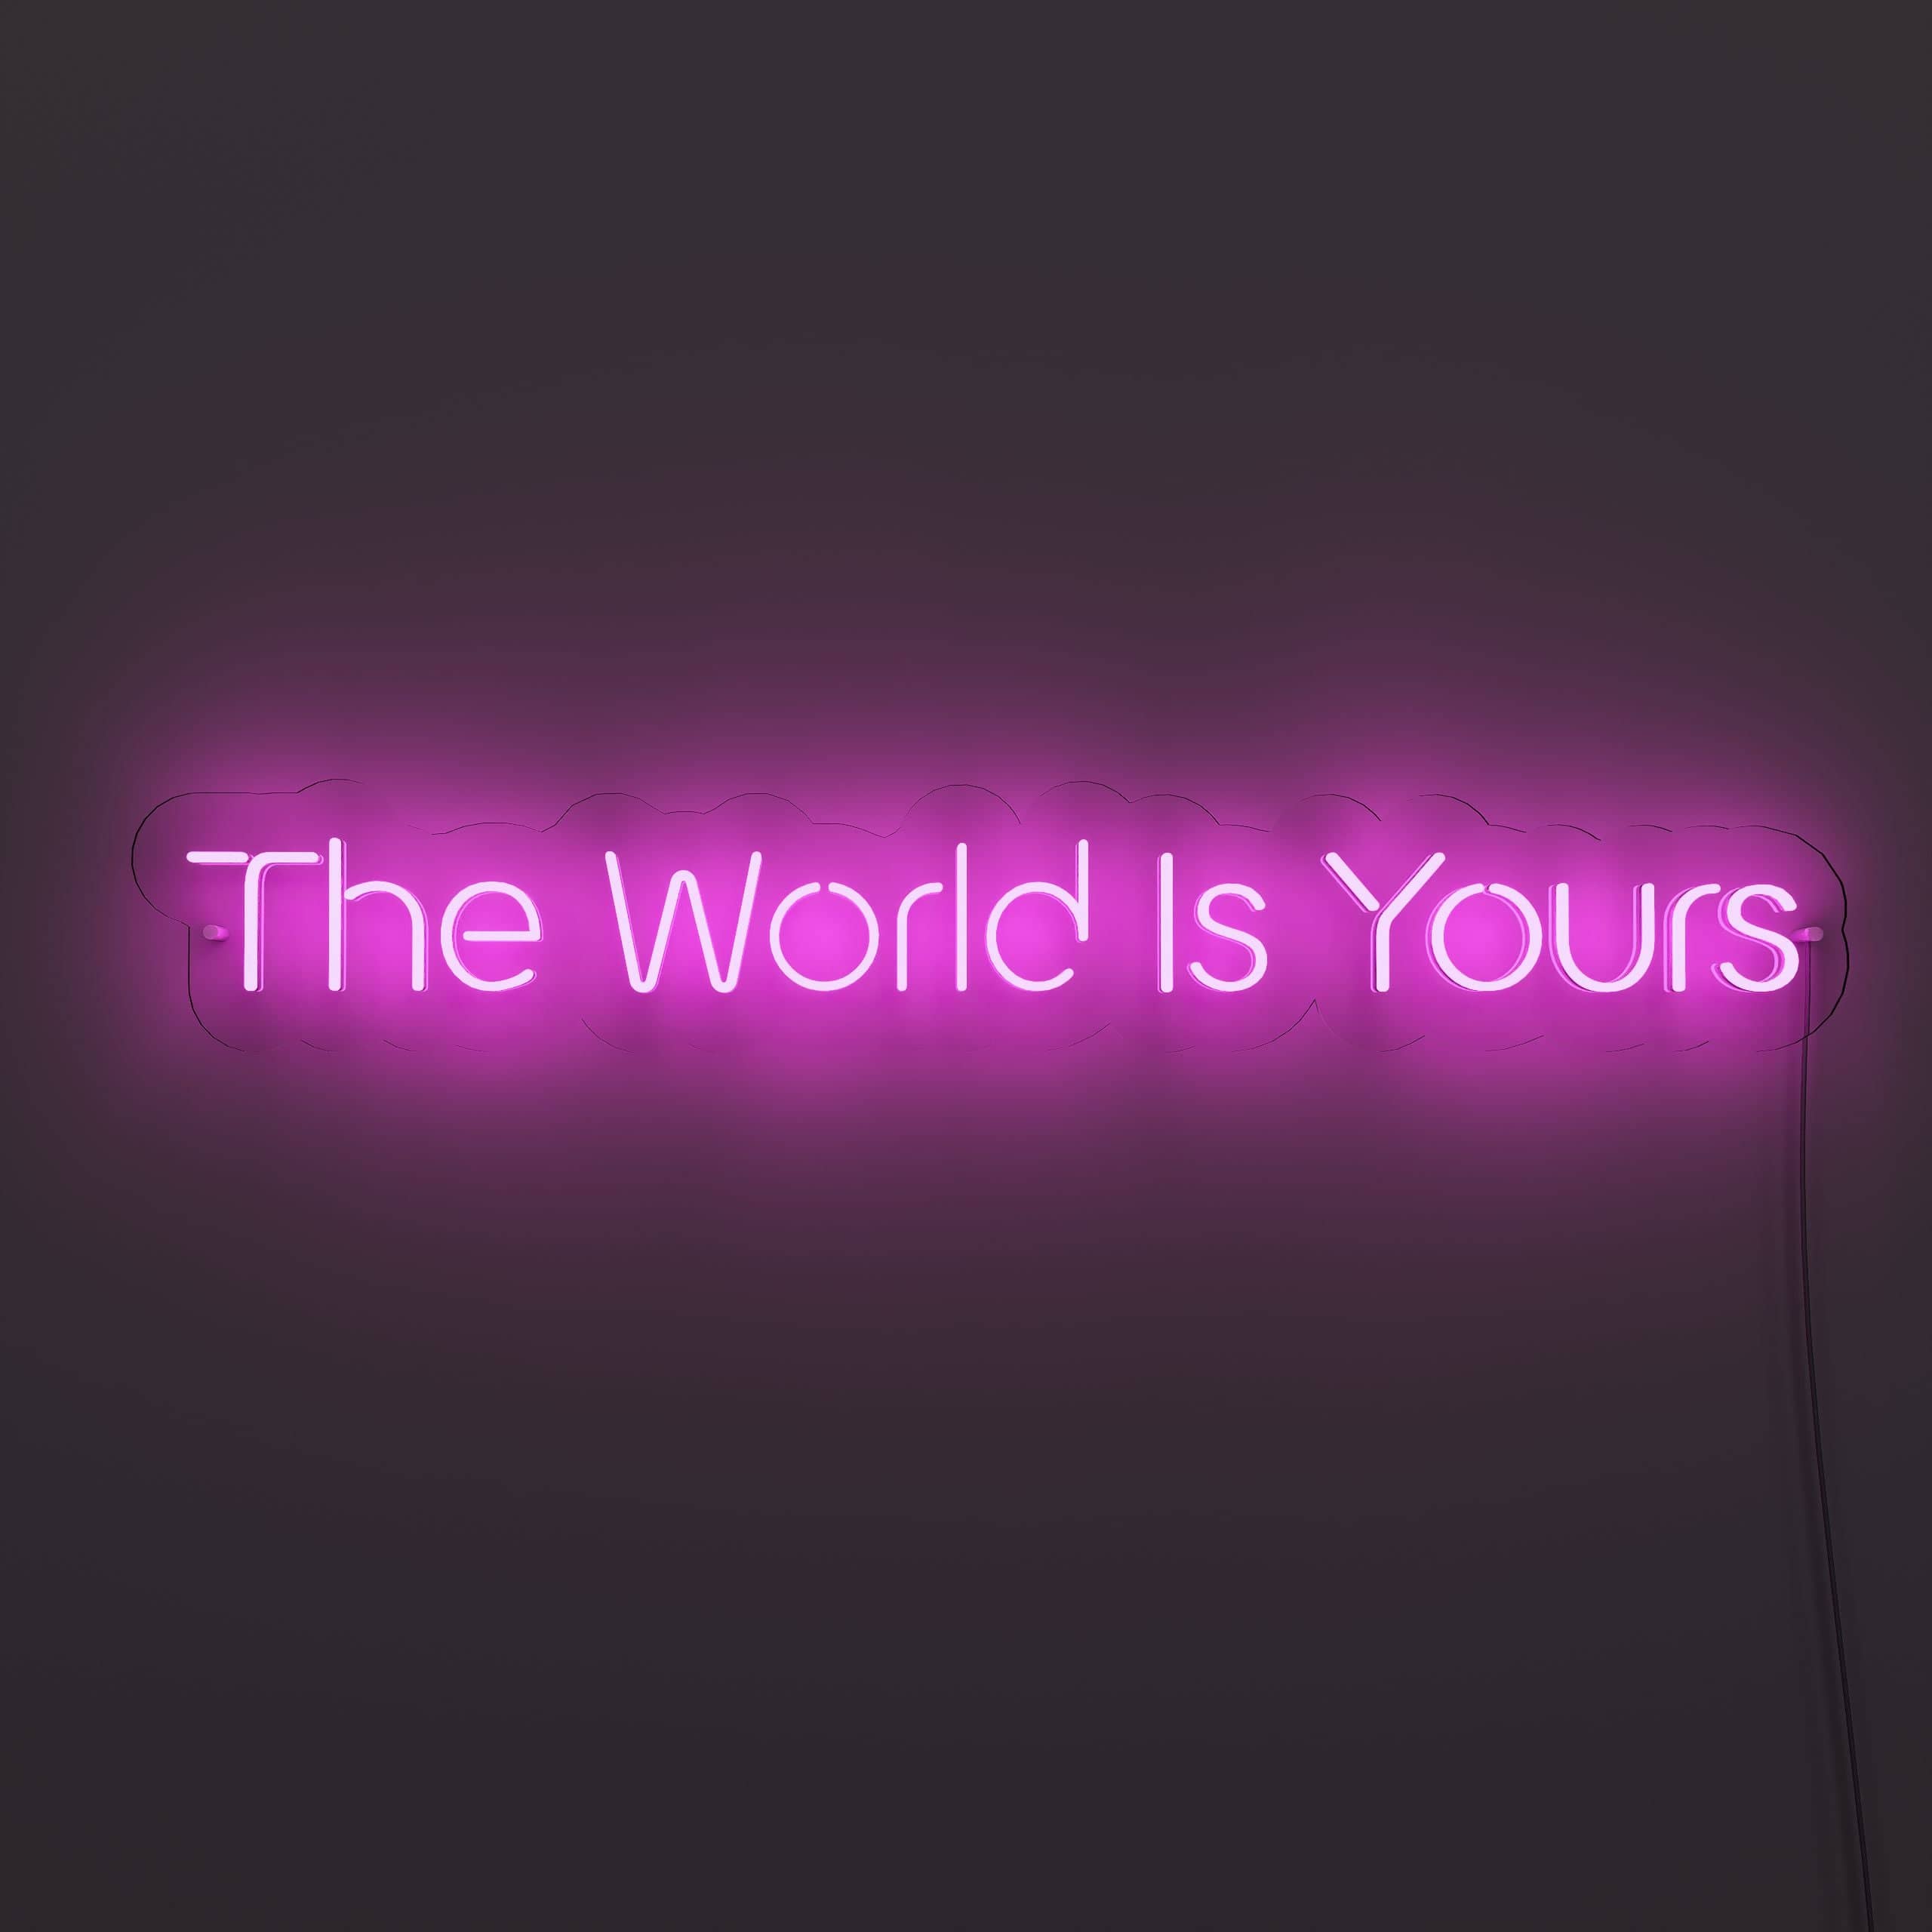 embrace-the-world's-limitless-horizons-neon-sign-lite